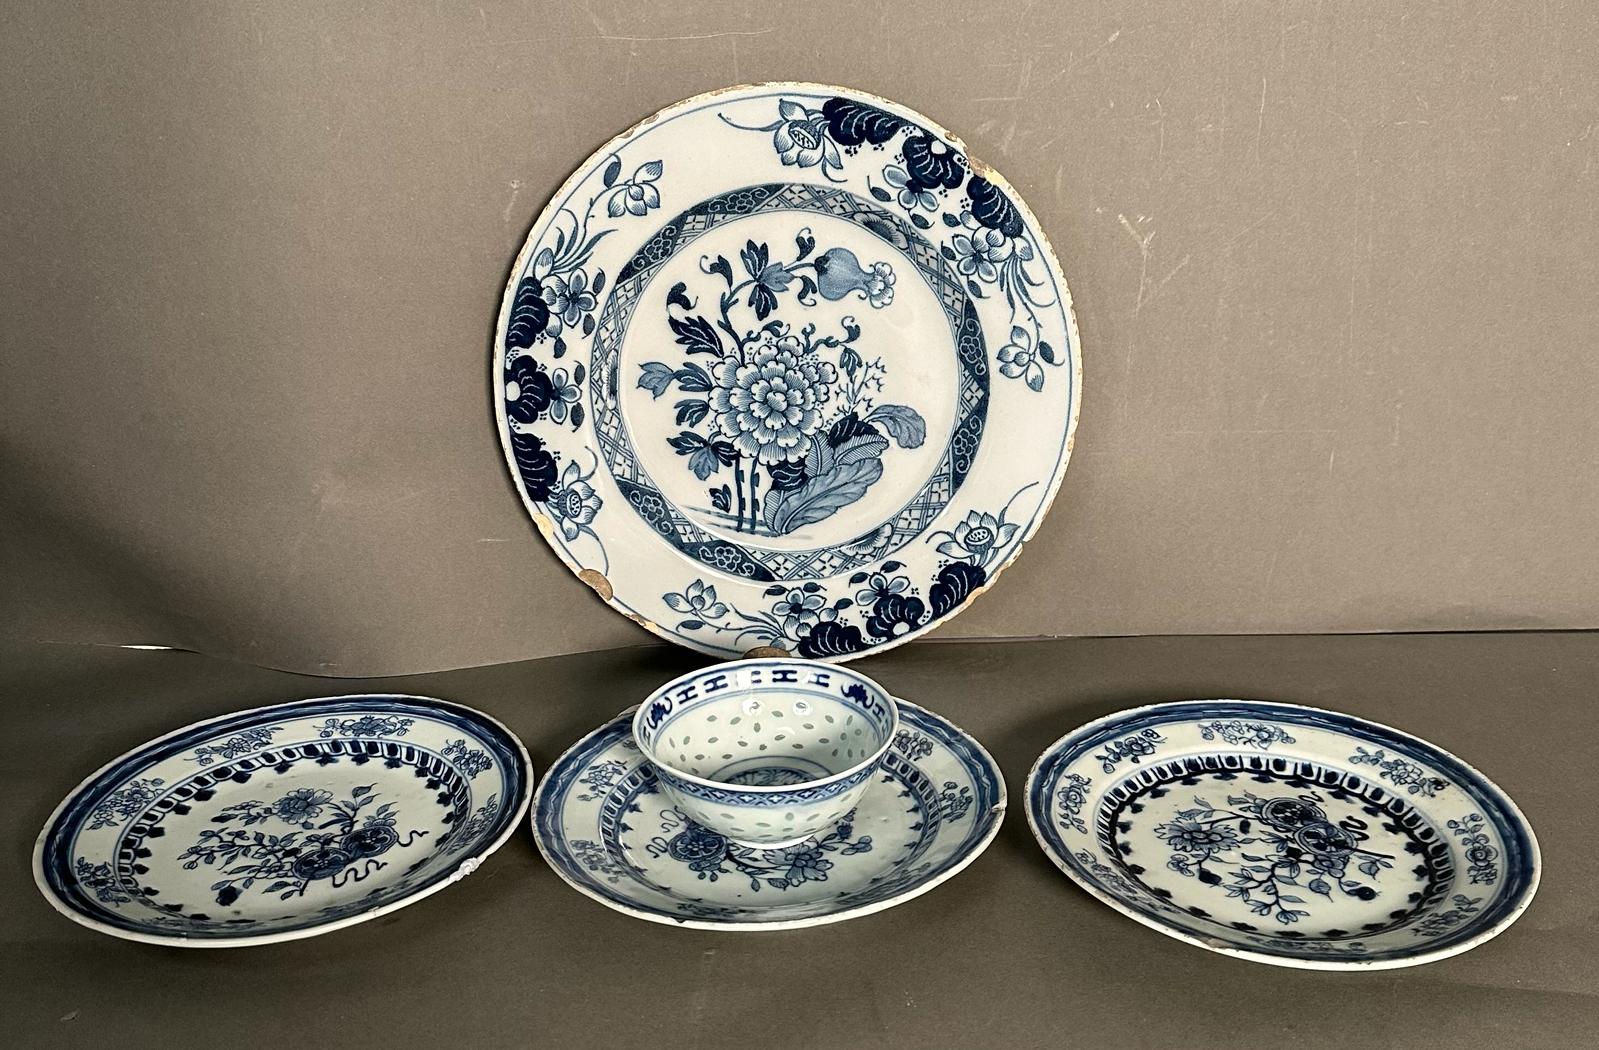 A selection of Chinese blue and white ceramic to include a plate, side plates and a small bowl